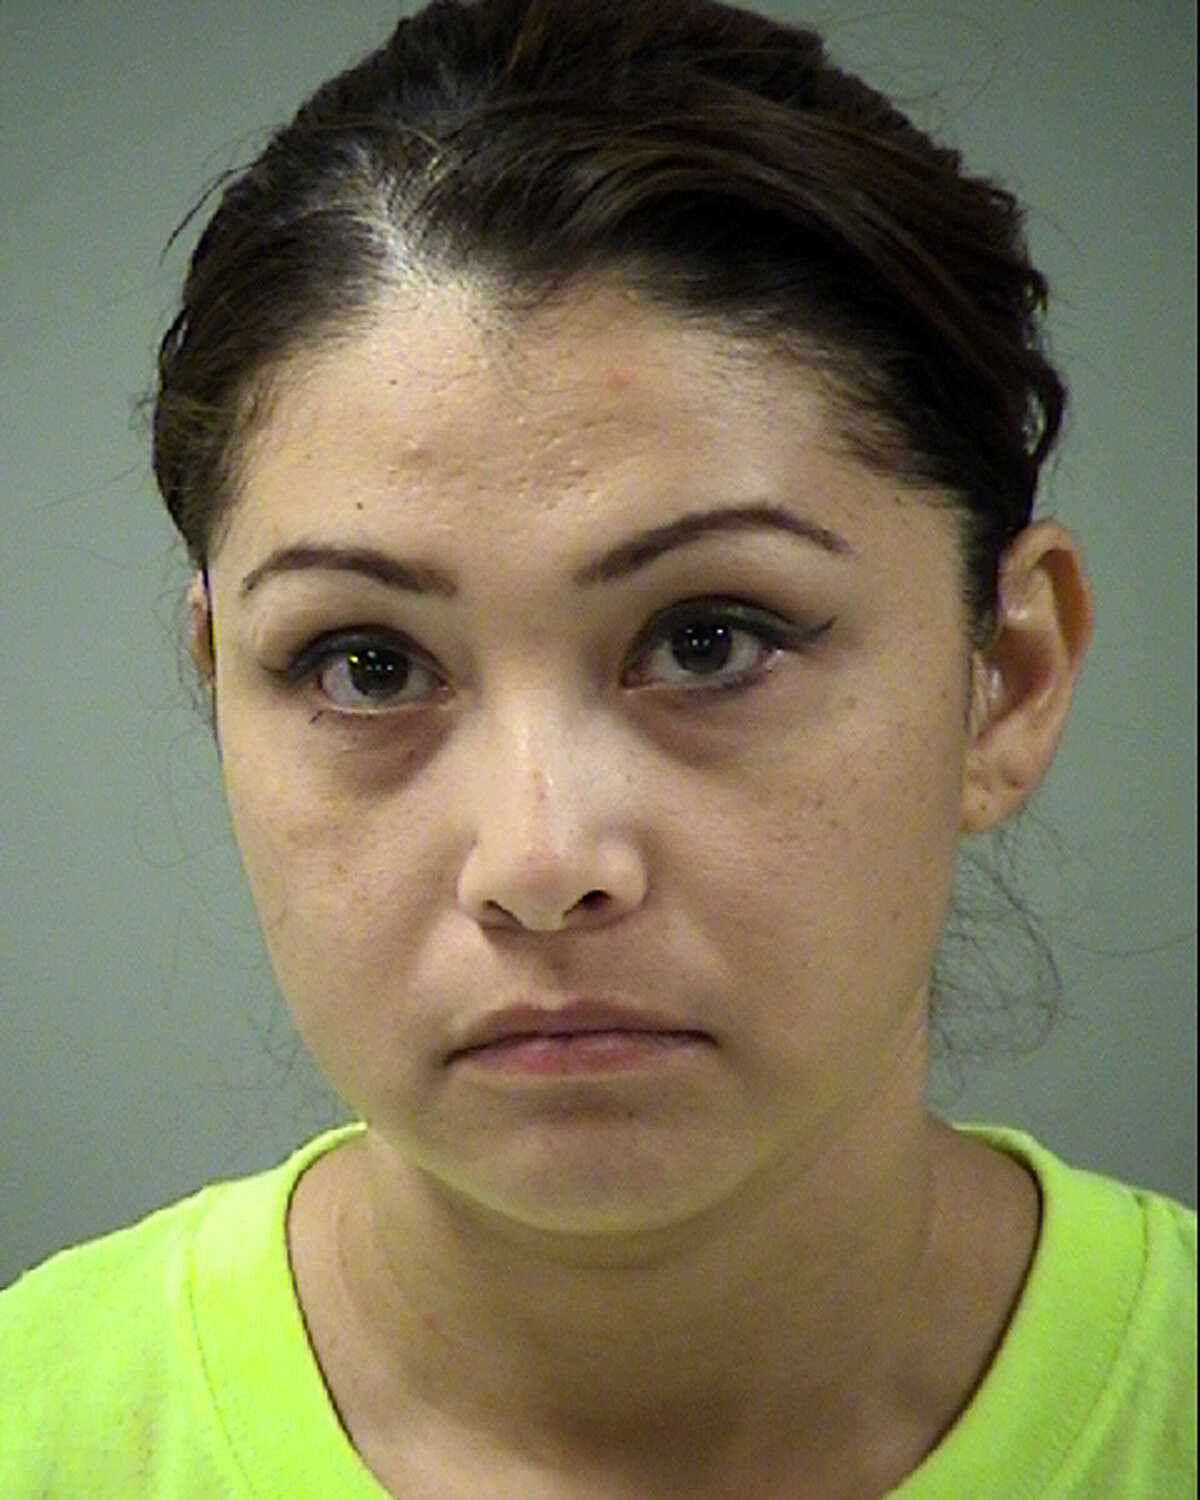 Stephanie Carmona faces a charge of continuous sexual abuse of a child, a first-degree felony, according to the San Antonio Police Department.